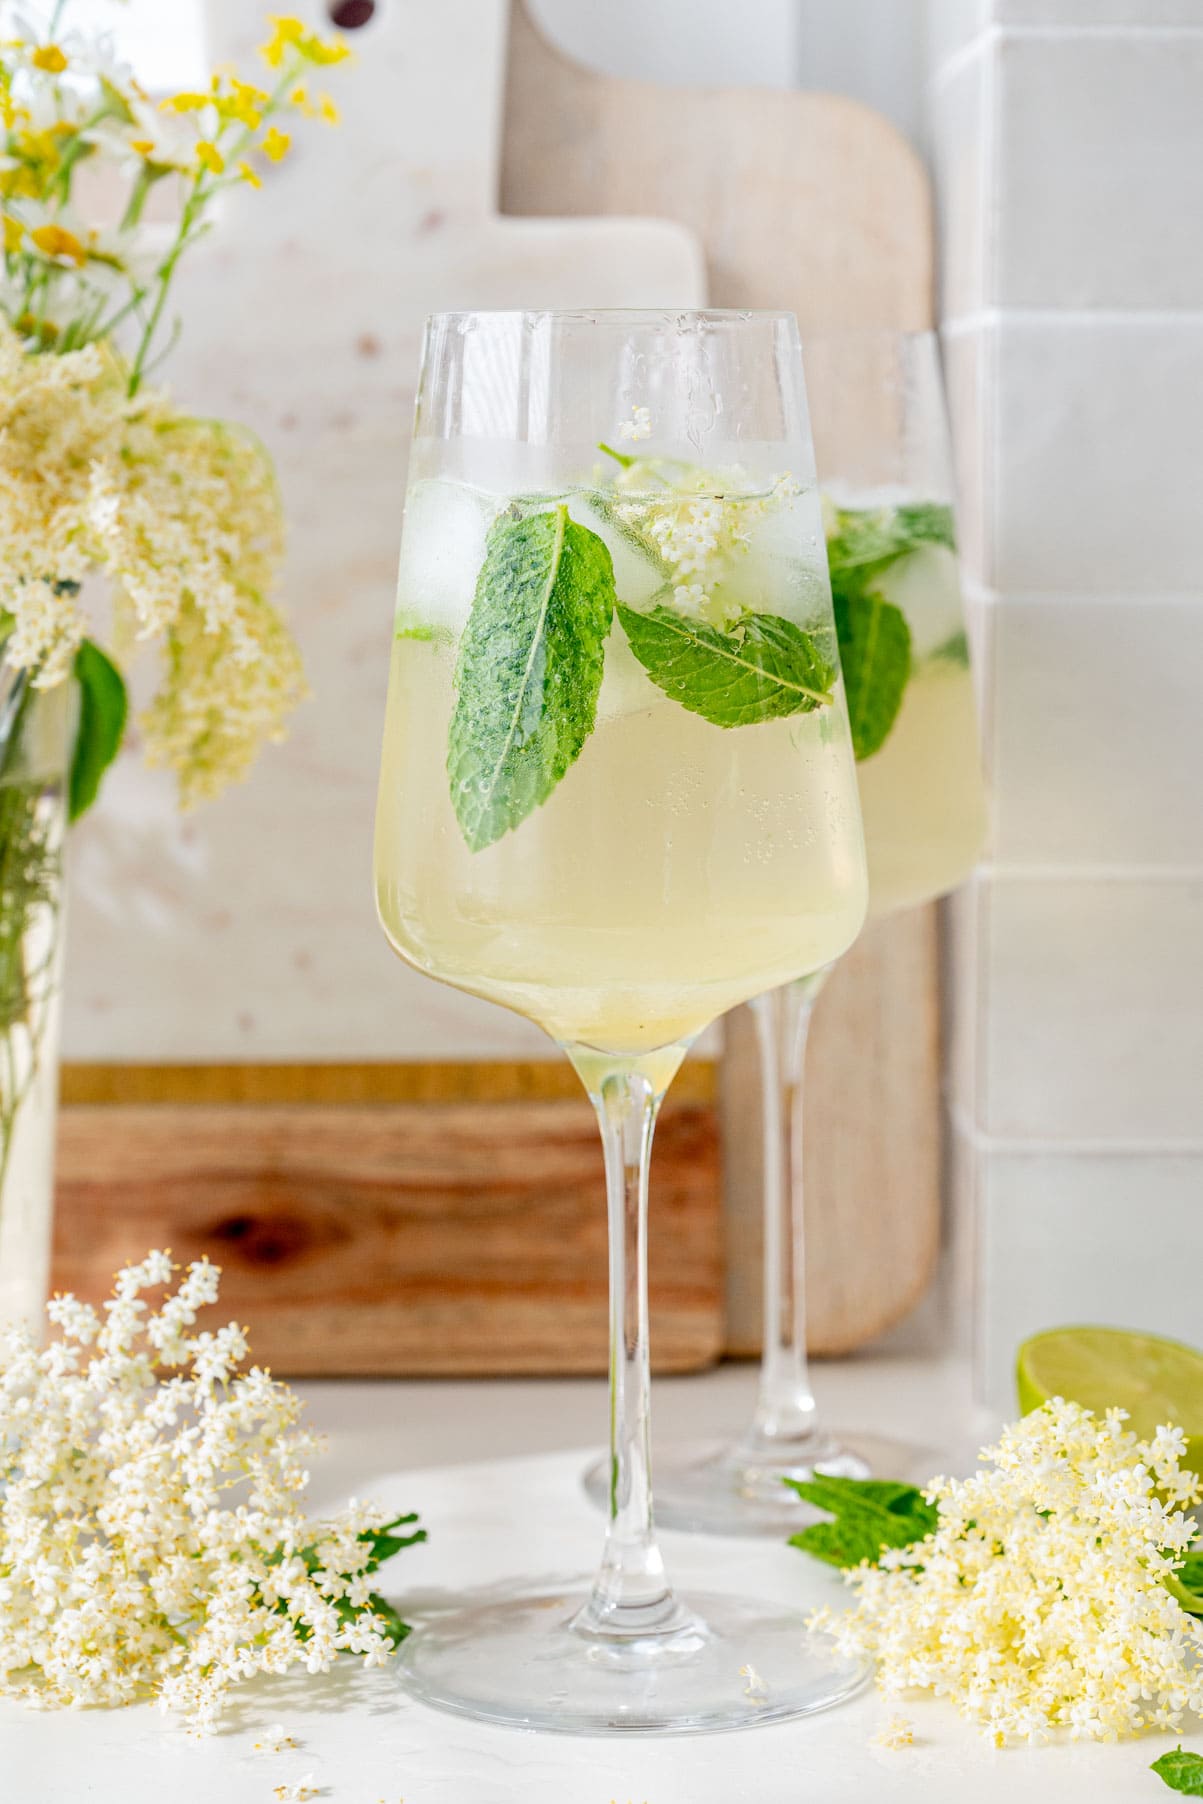 Two glasses with Hugo Cocktail. Elderflowers, mint leaves, and flowers in the background.